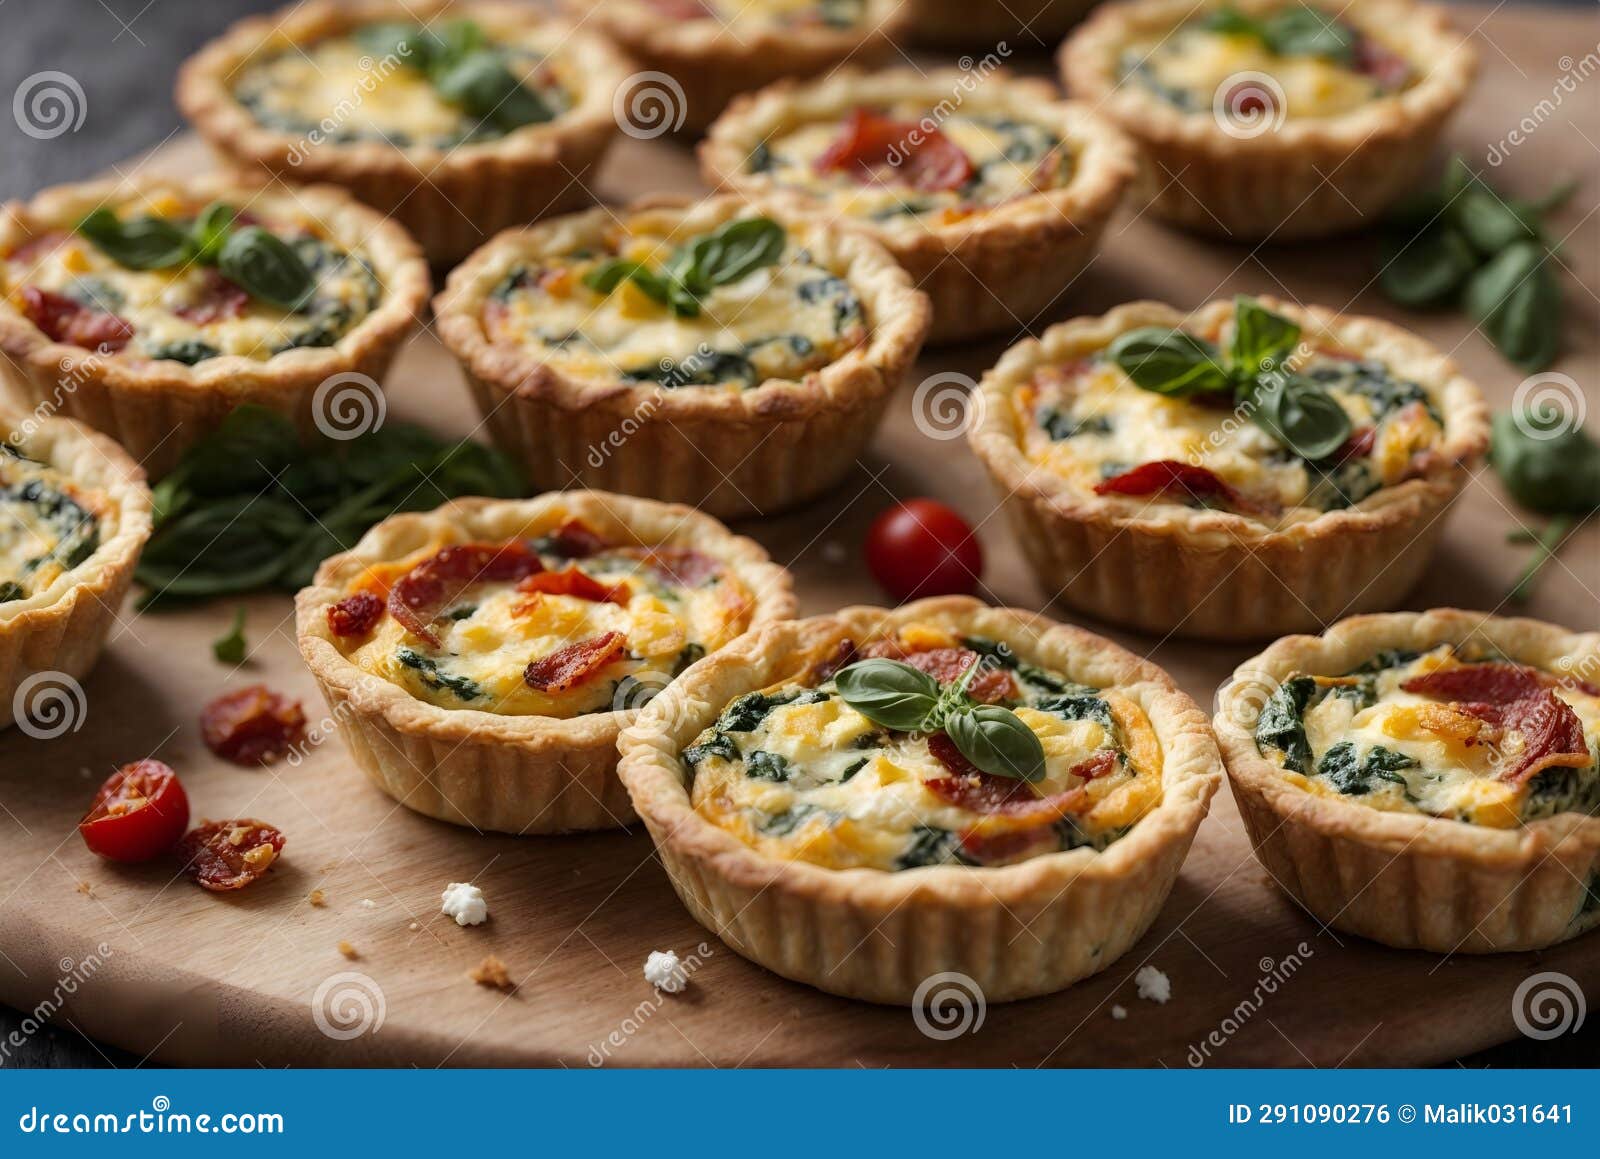 Mini Quiches - Fillings Like Bacon and Cheese, Spinach and Feta, or Sun ...